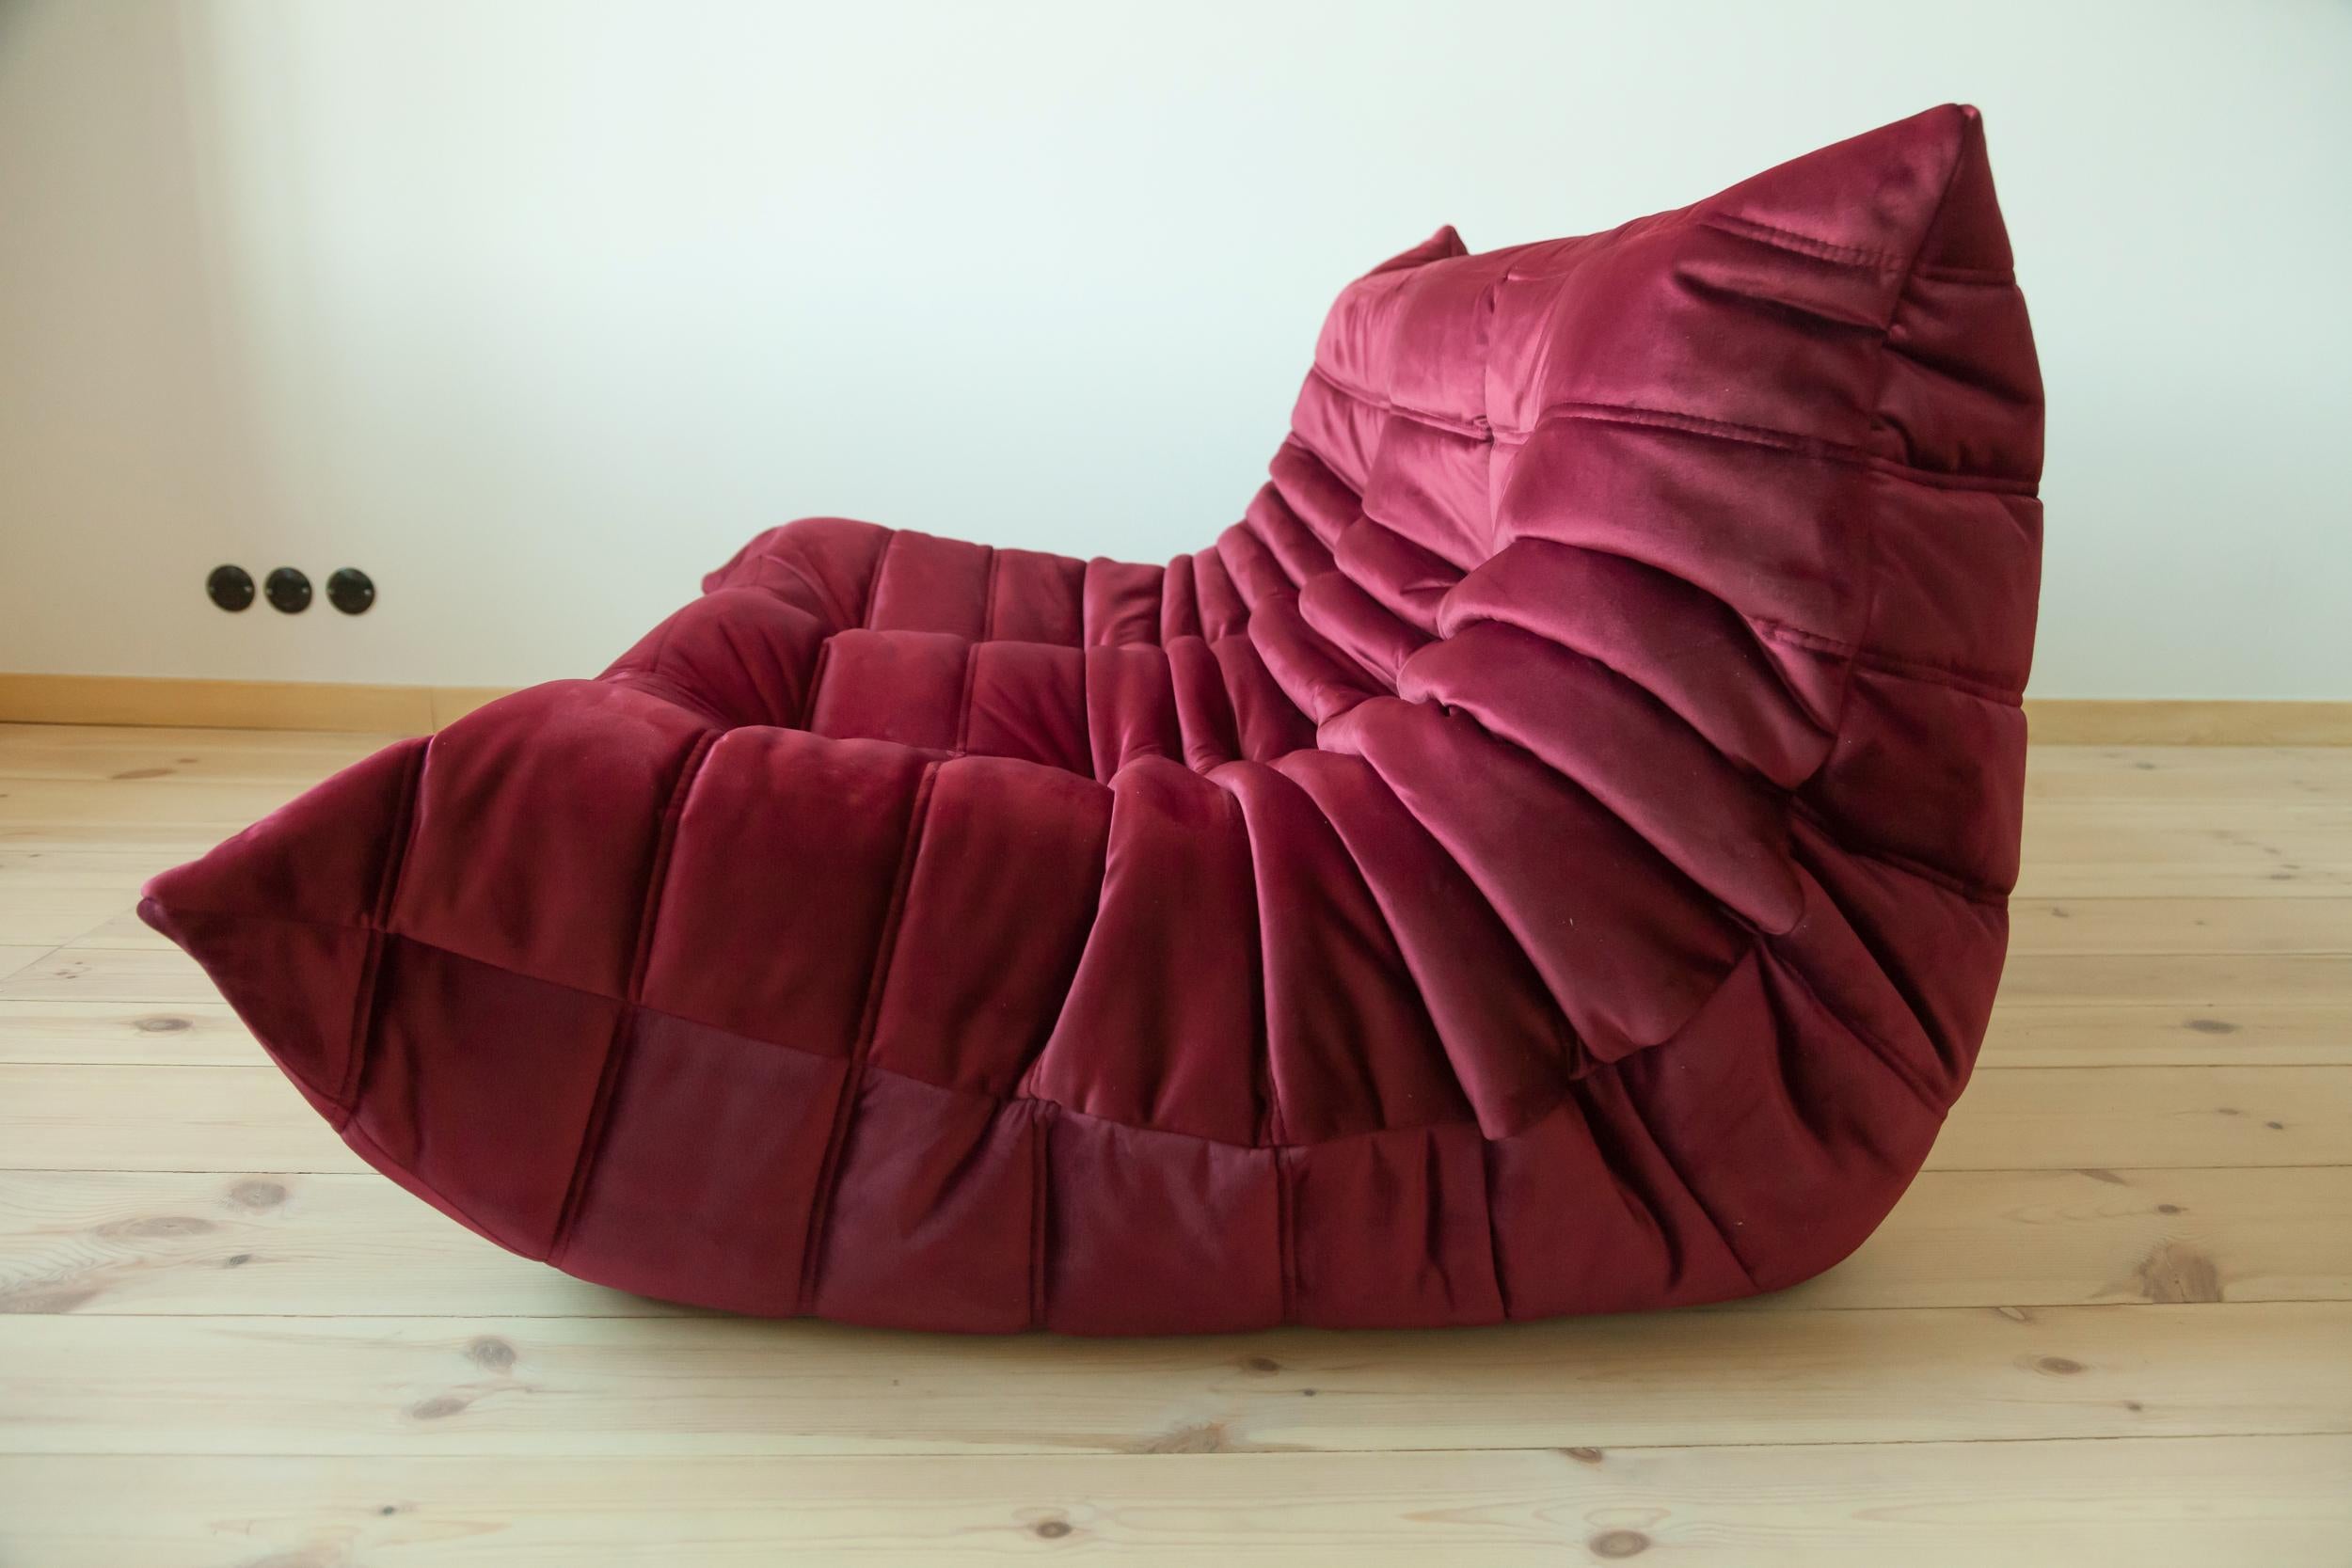 This two-seat Togo couch was designed by Michel Ducaroy in 1973 and was manufactured by Ligne Roset in France. It has been reupholstered in new burgundy velvet (131 x 102 x 70 cm). It has the original Ligne Roset logo and genuine Ligne Roset bottom.